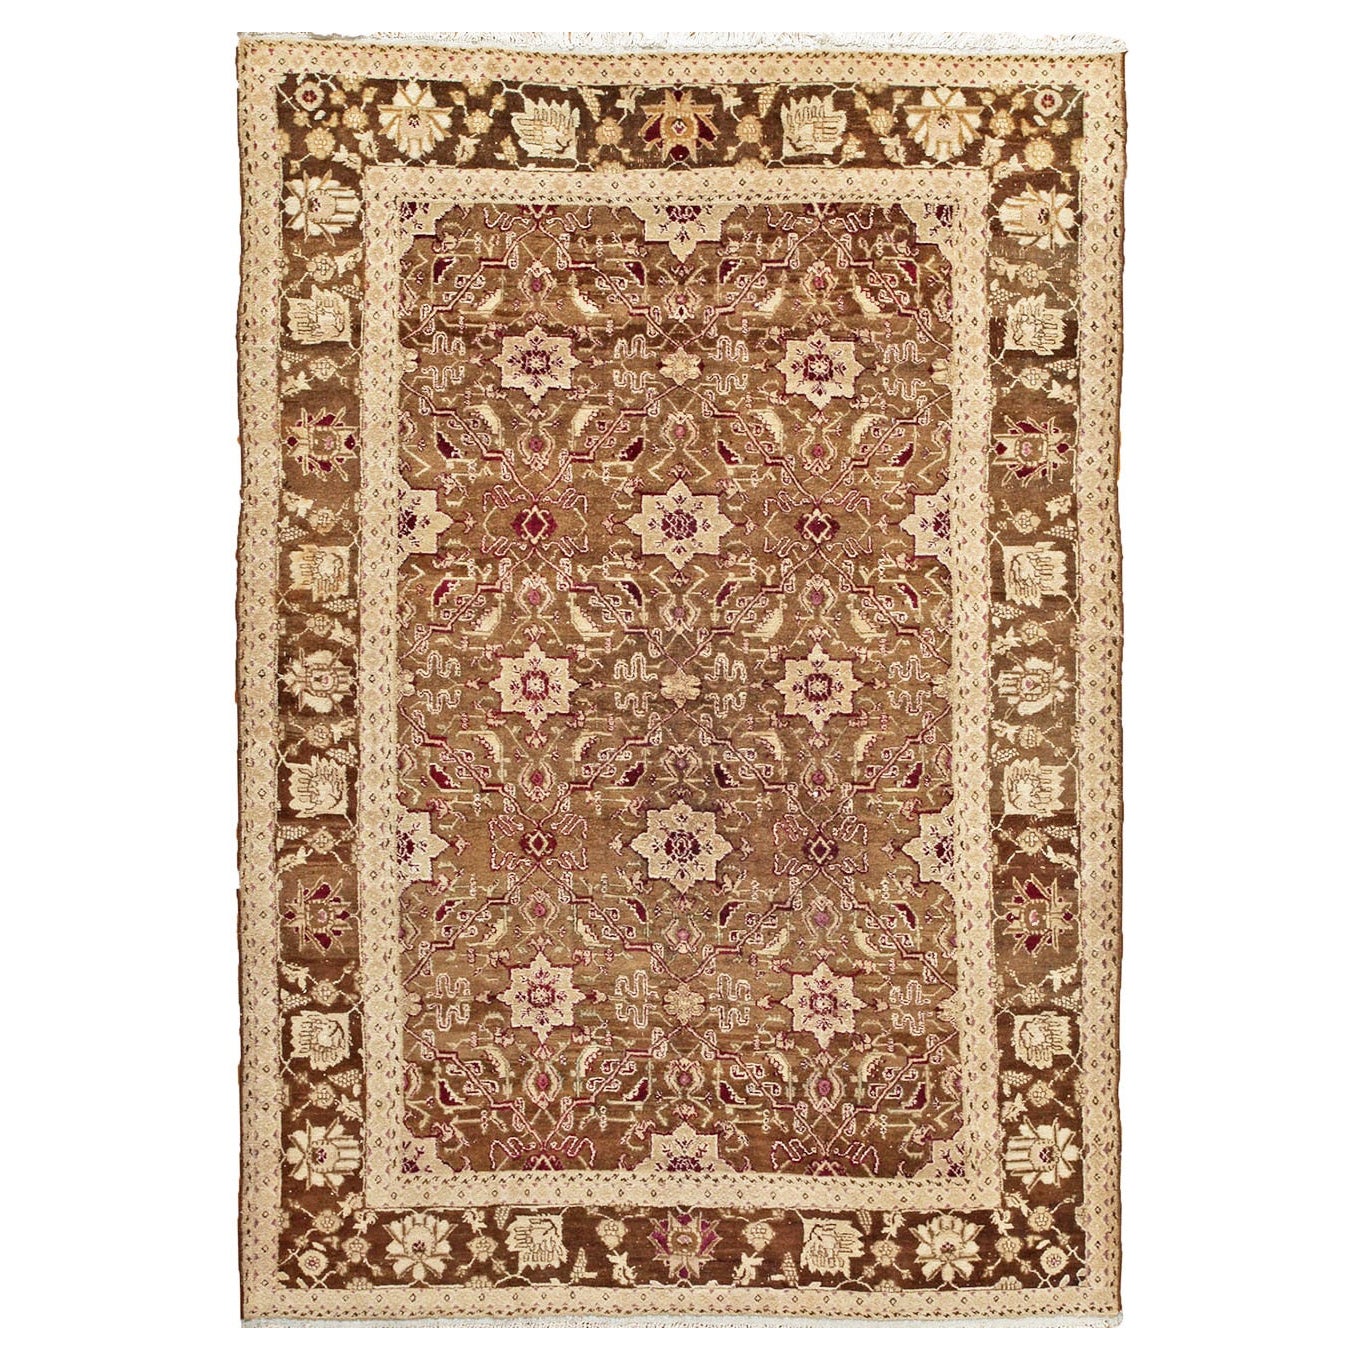 Antique Indian Agra Rug. Size: 5 ft 9 in x 8 ft 5 in 